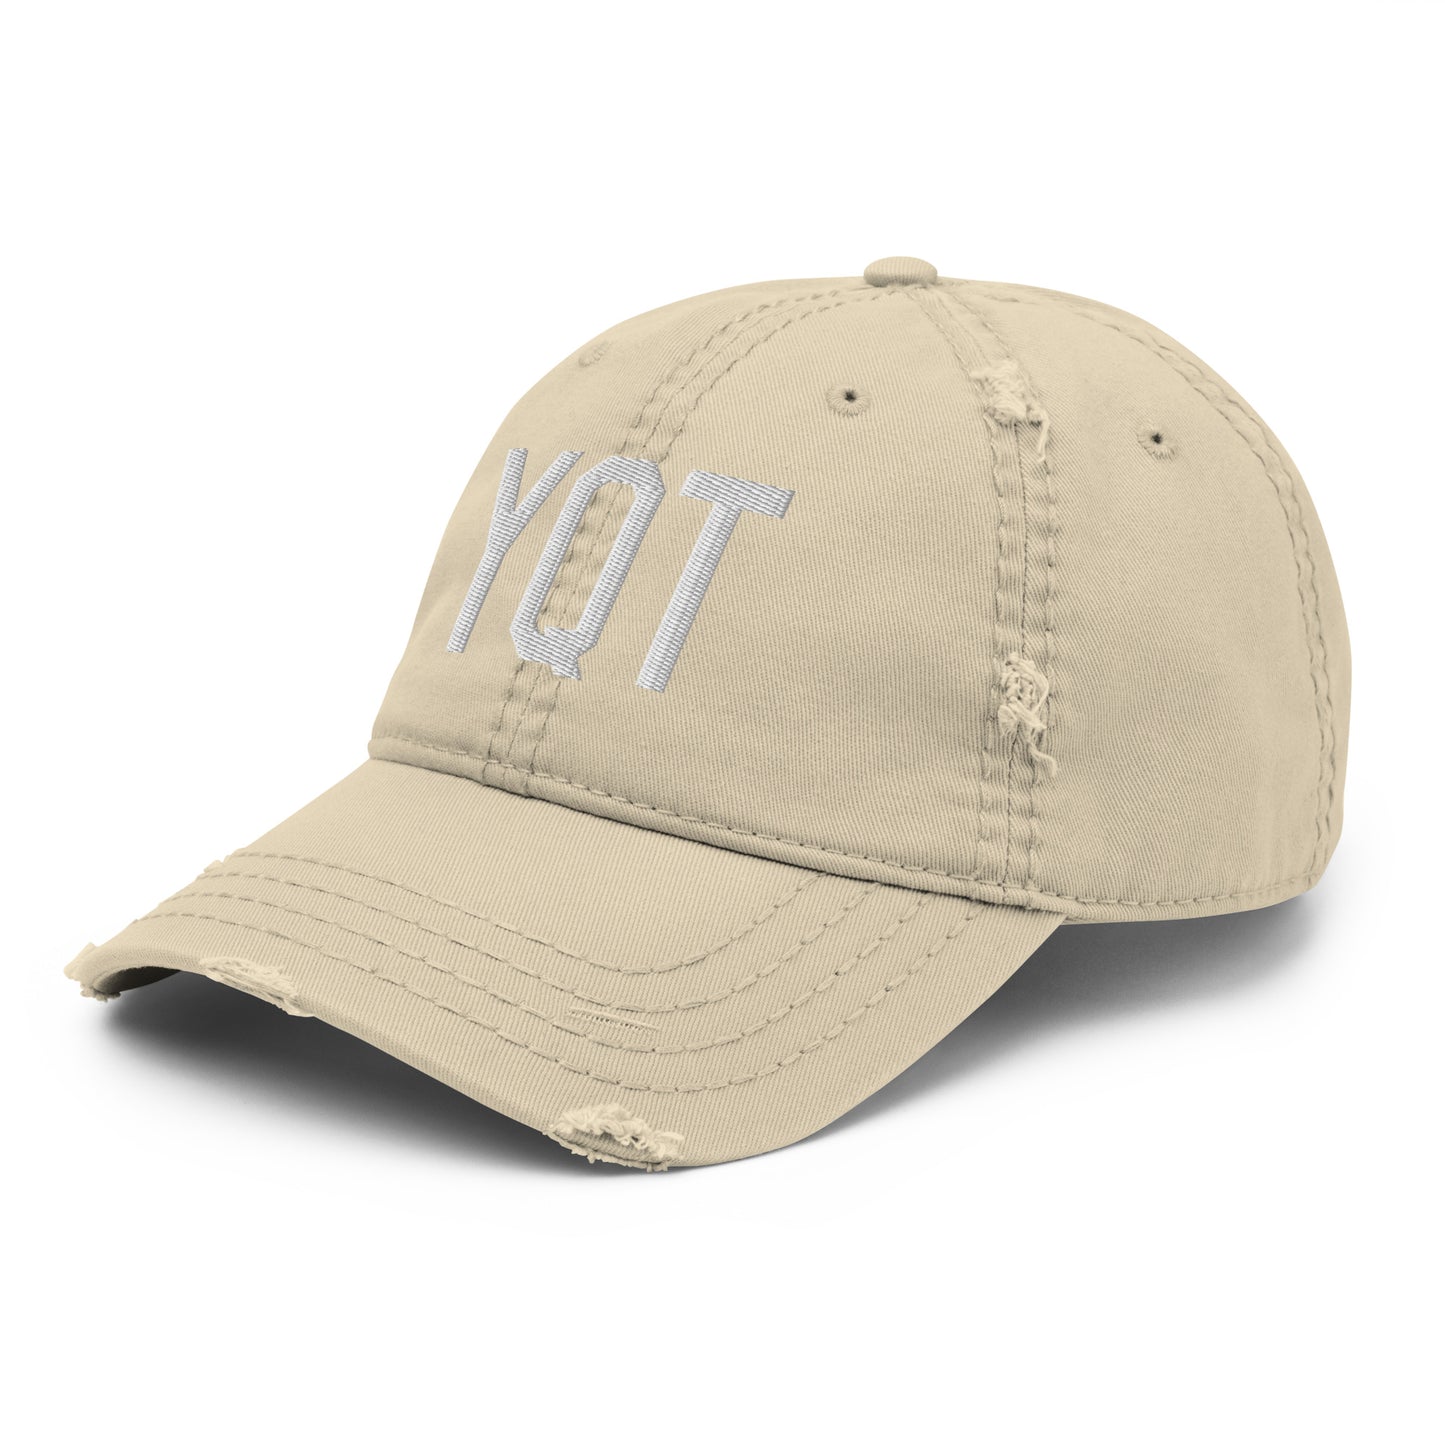 Airport Code Distressed Hat - White • YQT Thunder Bay • YHM Designs - Image 19